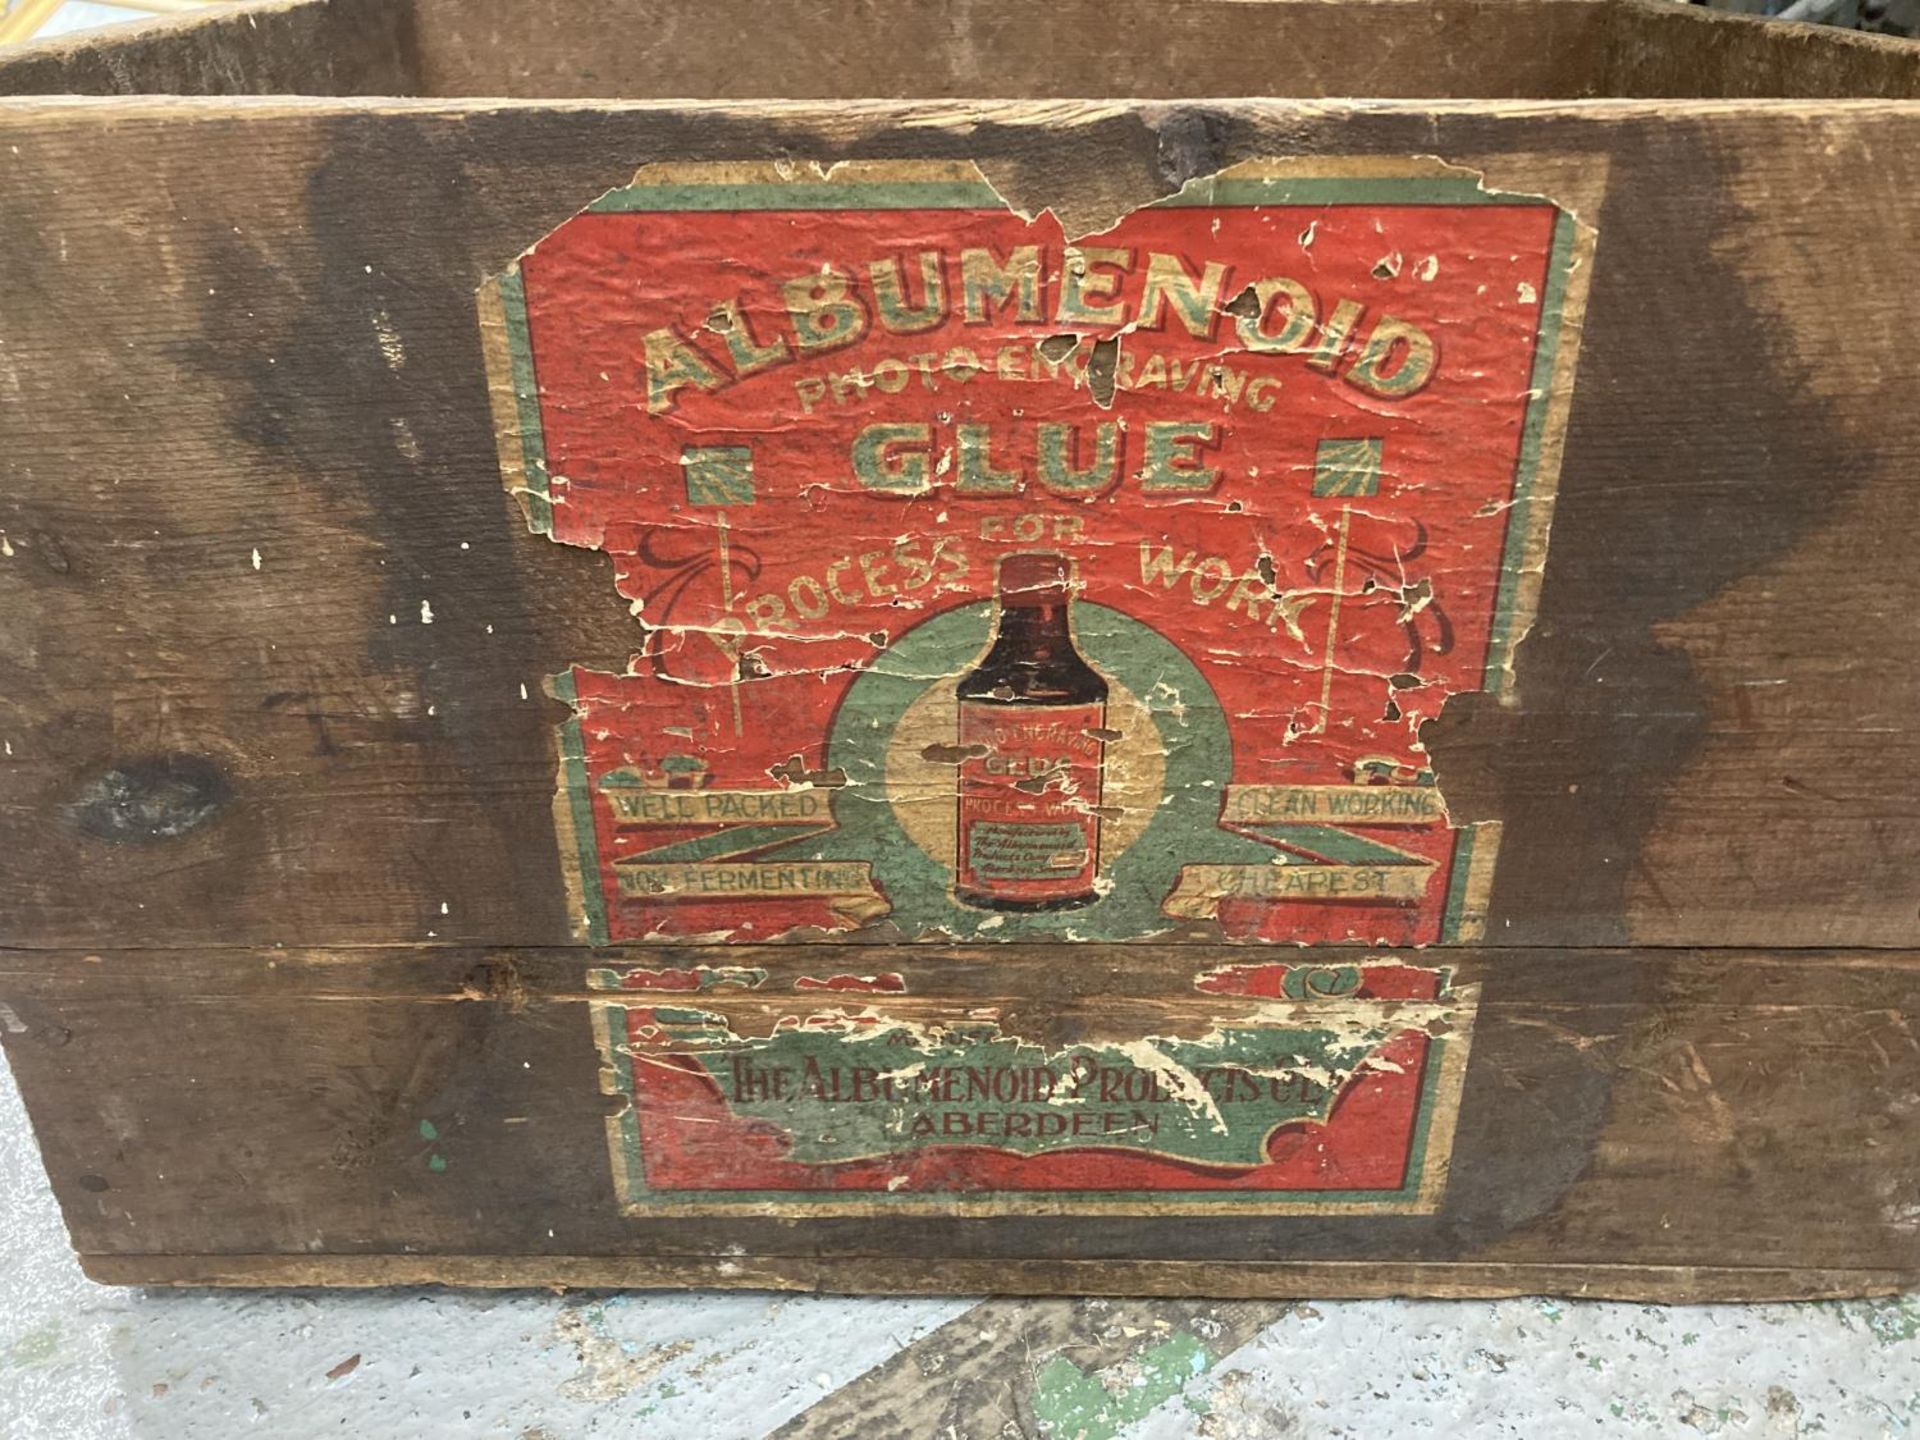 A VINTAGE BOX WITH A PHOTO ENLARGING GLUE LABEL - Image 3 of 3